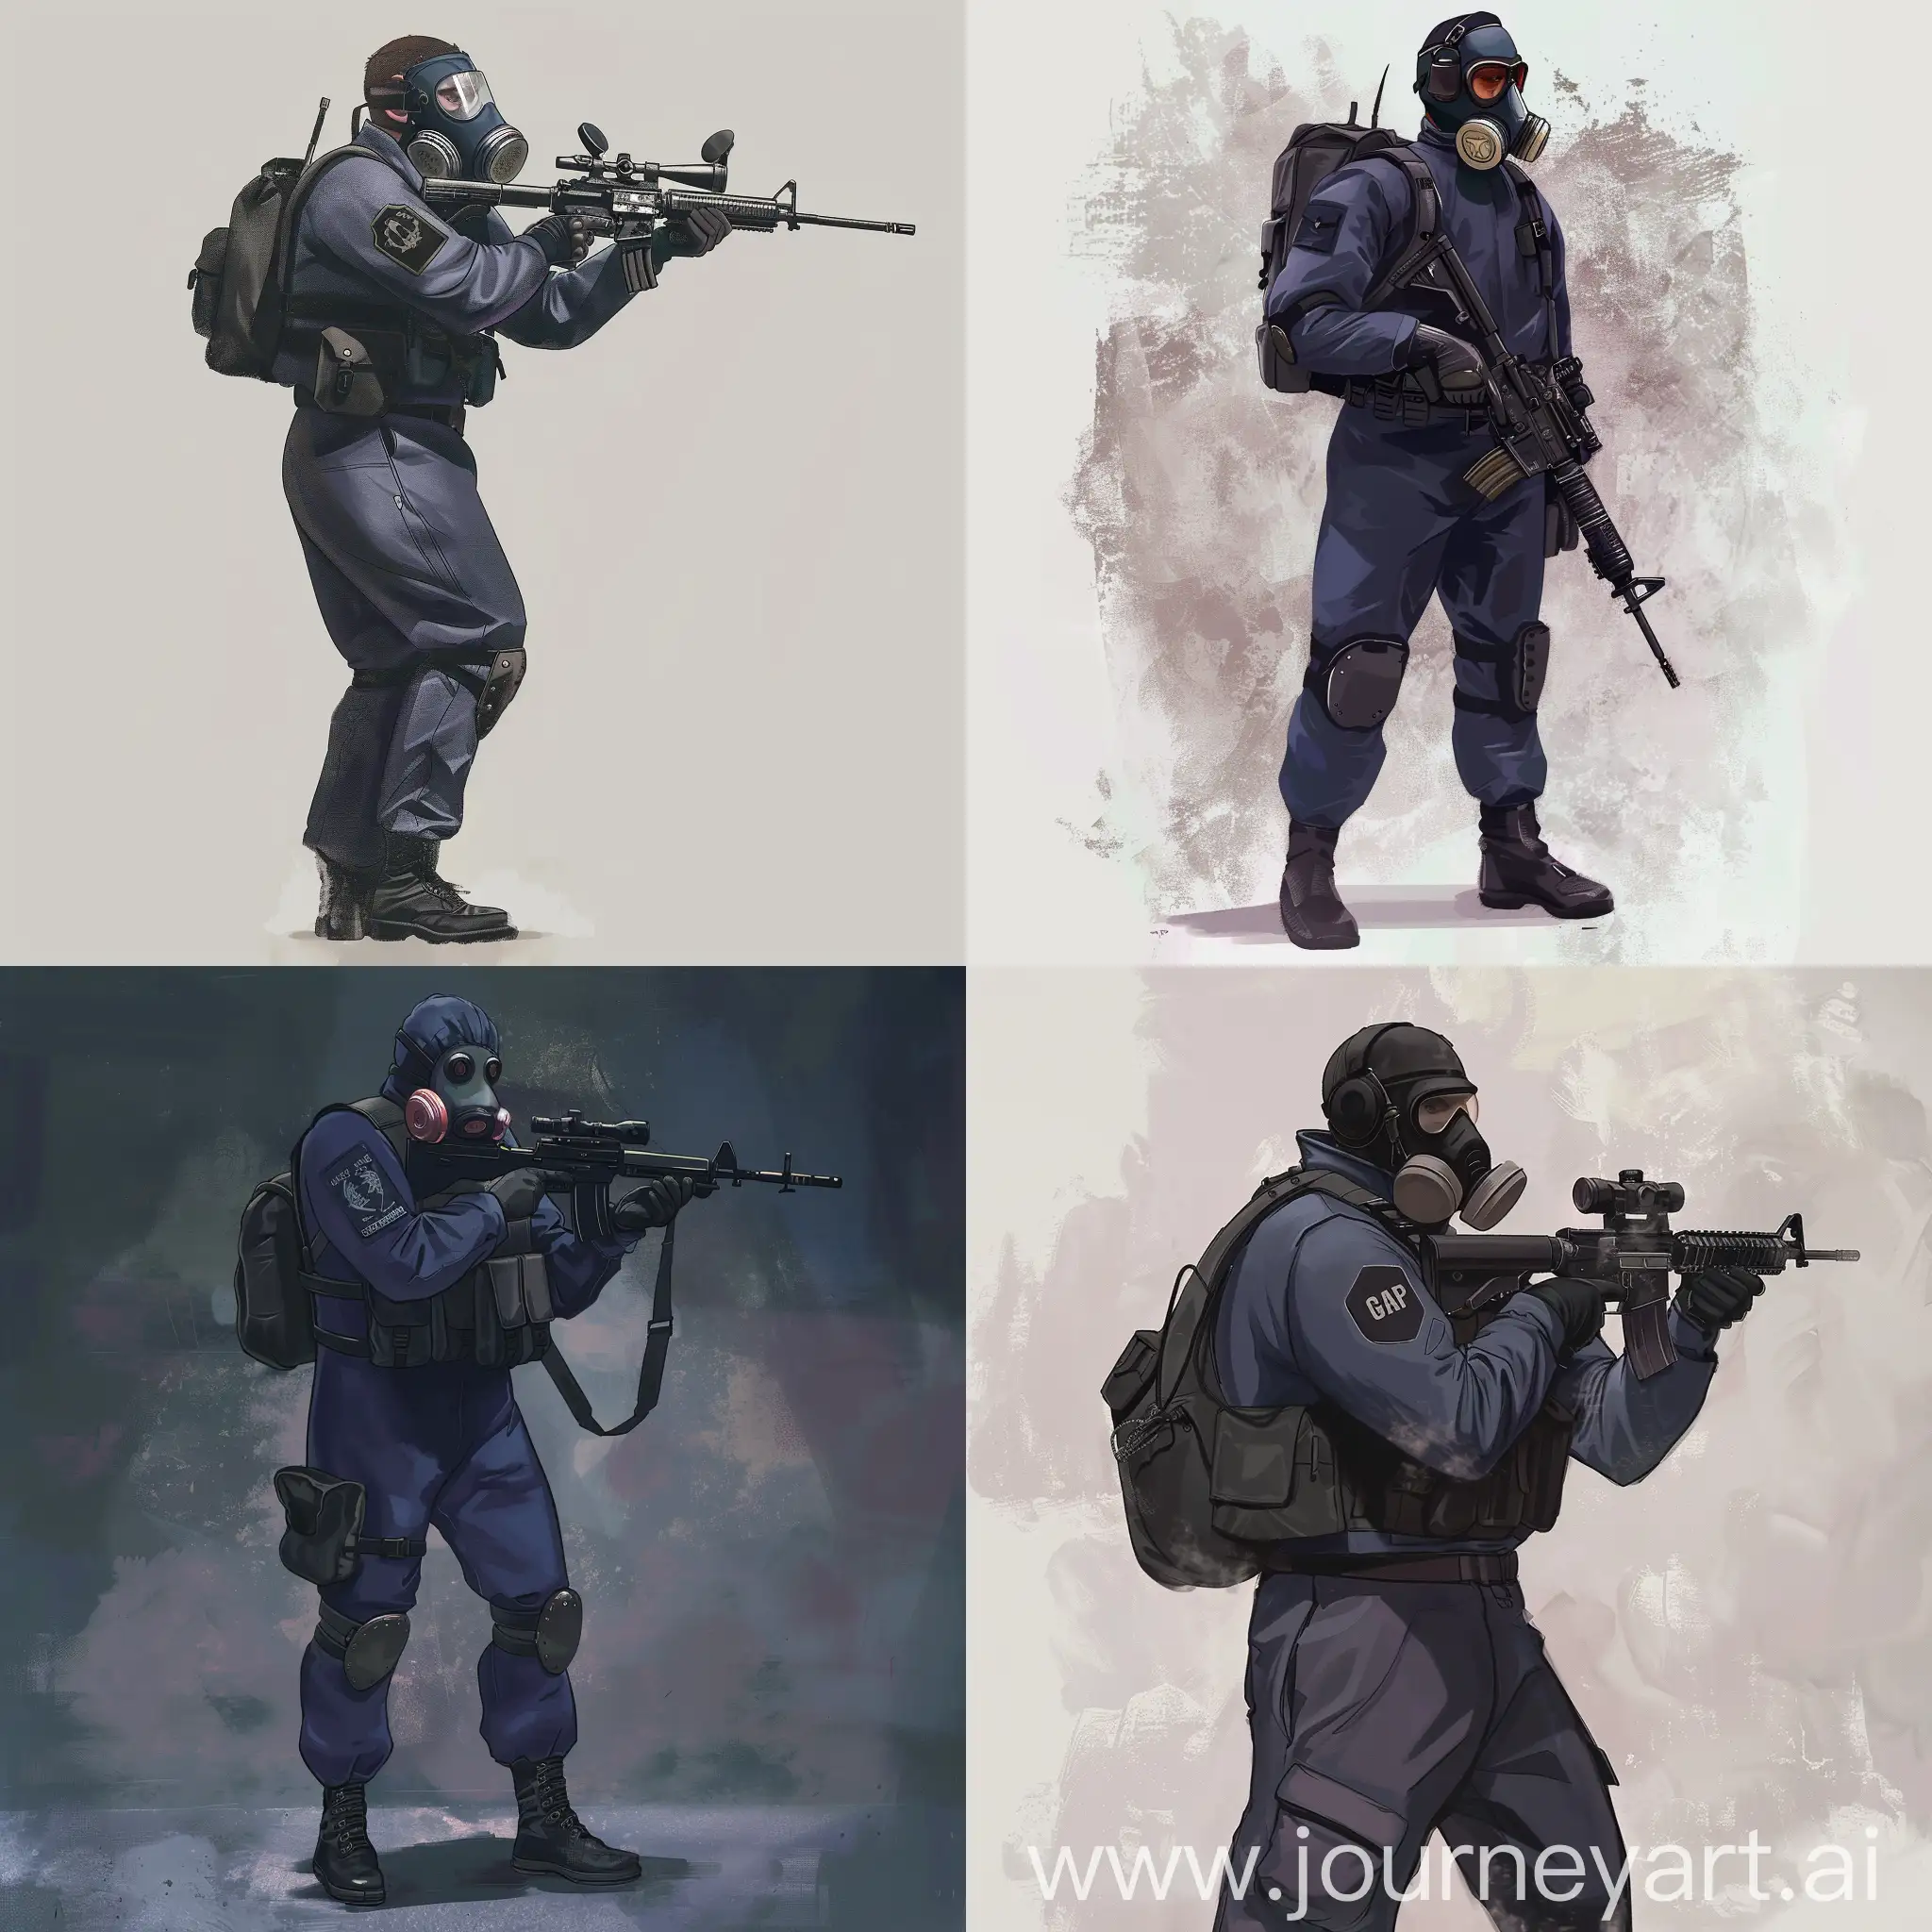 Concept character art, British SAS operator, dark purple military jumpsuit, hazmat protective gasmask on his face, small military backpack, military unloading on his body, sniper rifle in his hands.